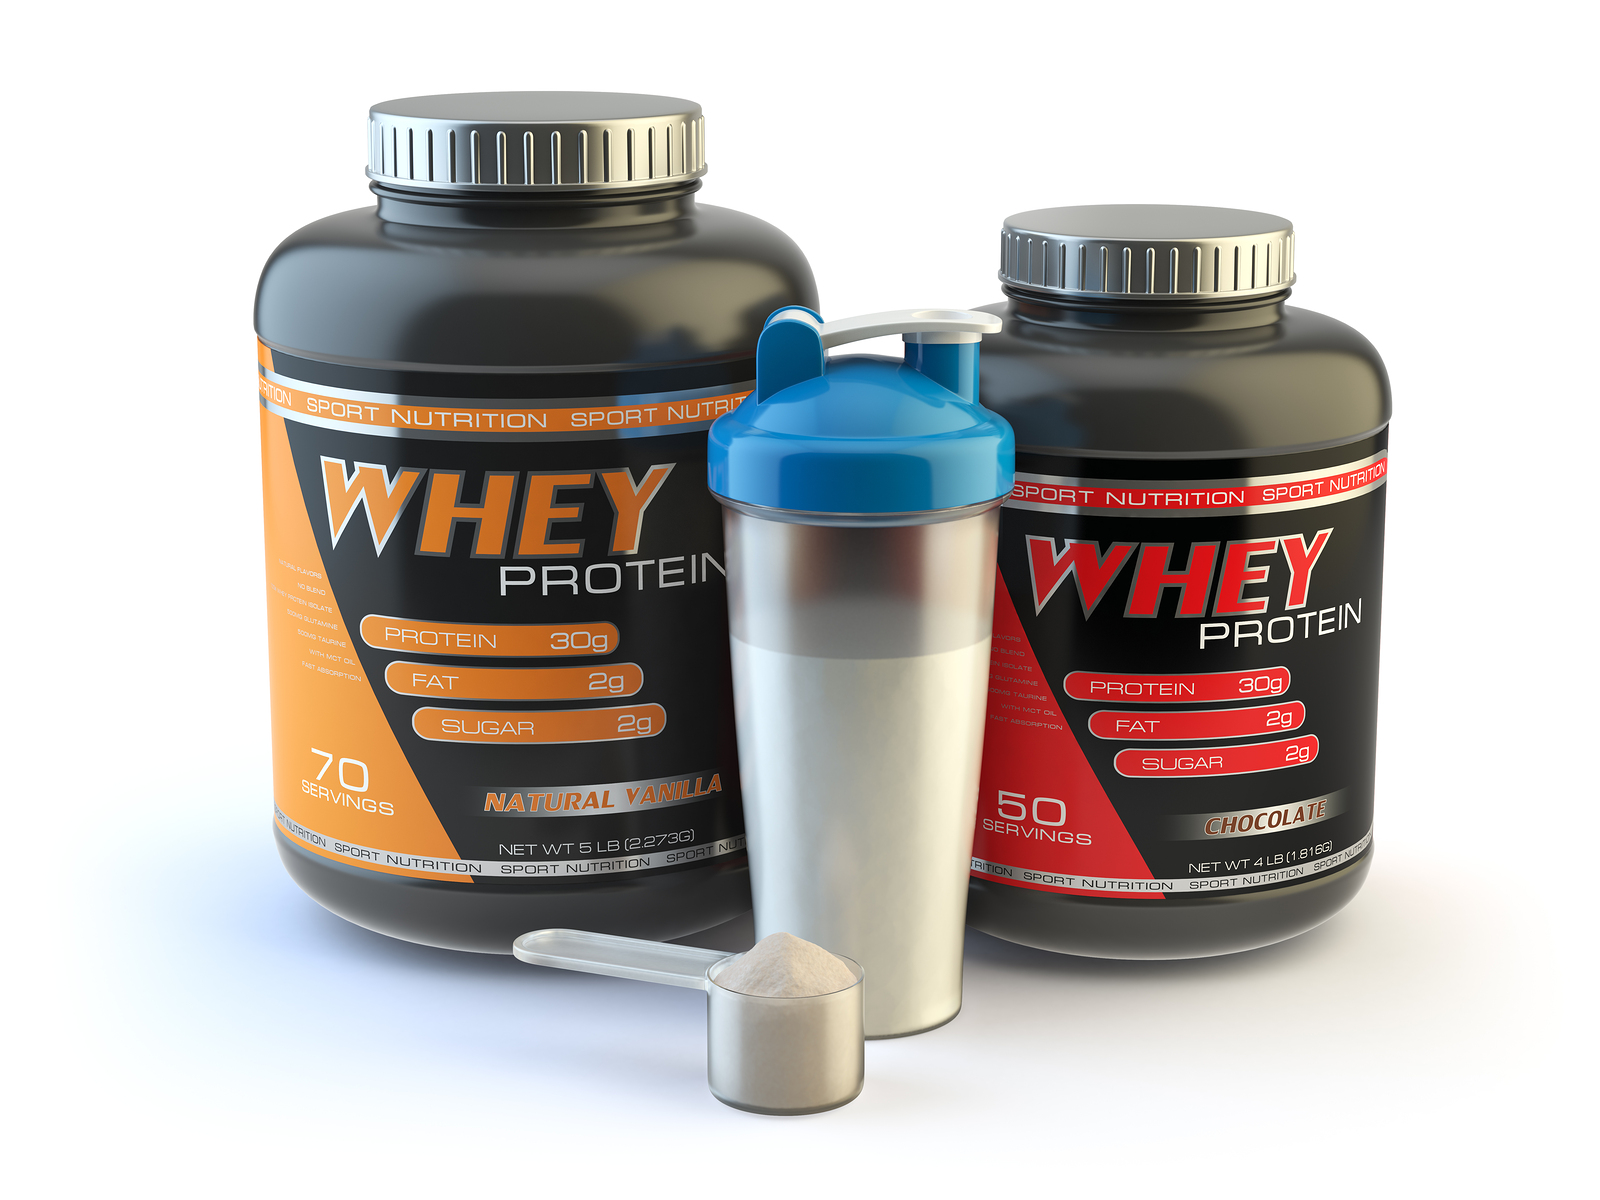 Whey protein can be very beneficial for minimizing muscle soreness.